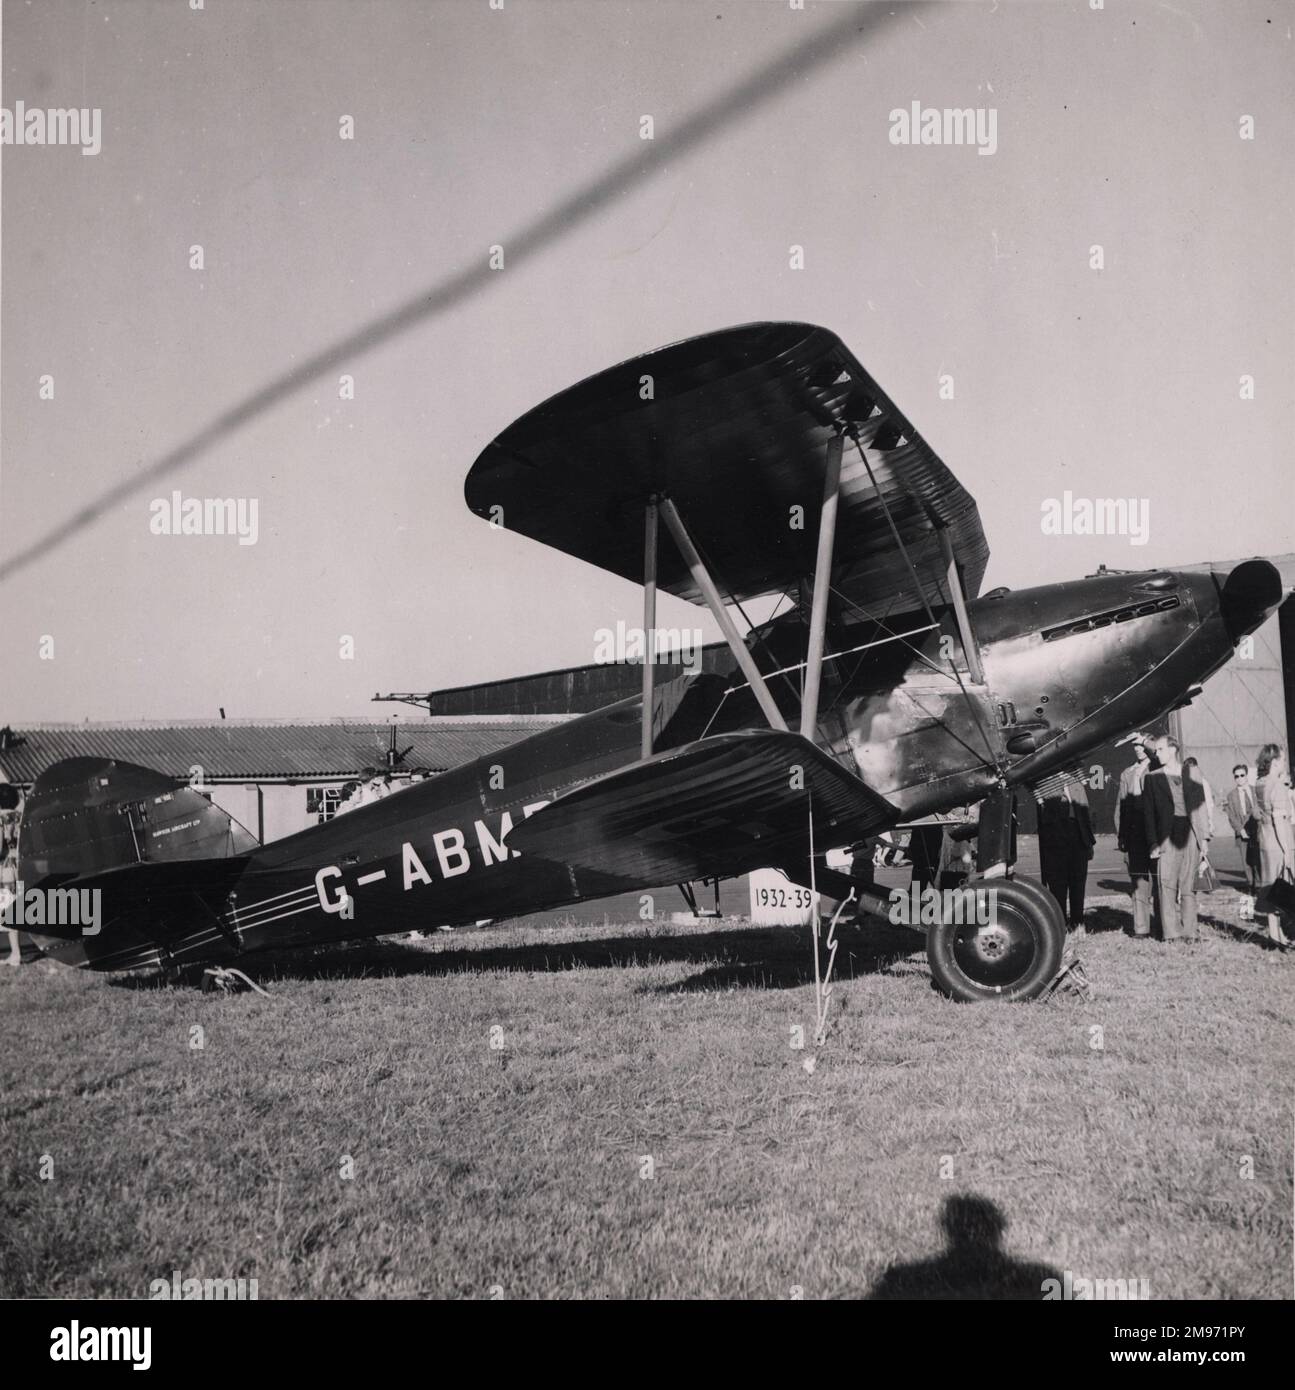 Hawker Hart II, G-ABMR, in post-war racing colours at the 50 years of Flying display at Hendon in 1951. This aircraft is currently on display at the RAF Museum, Hendon, registered J9941. Stock Photo